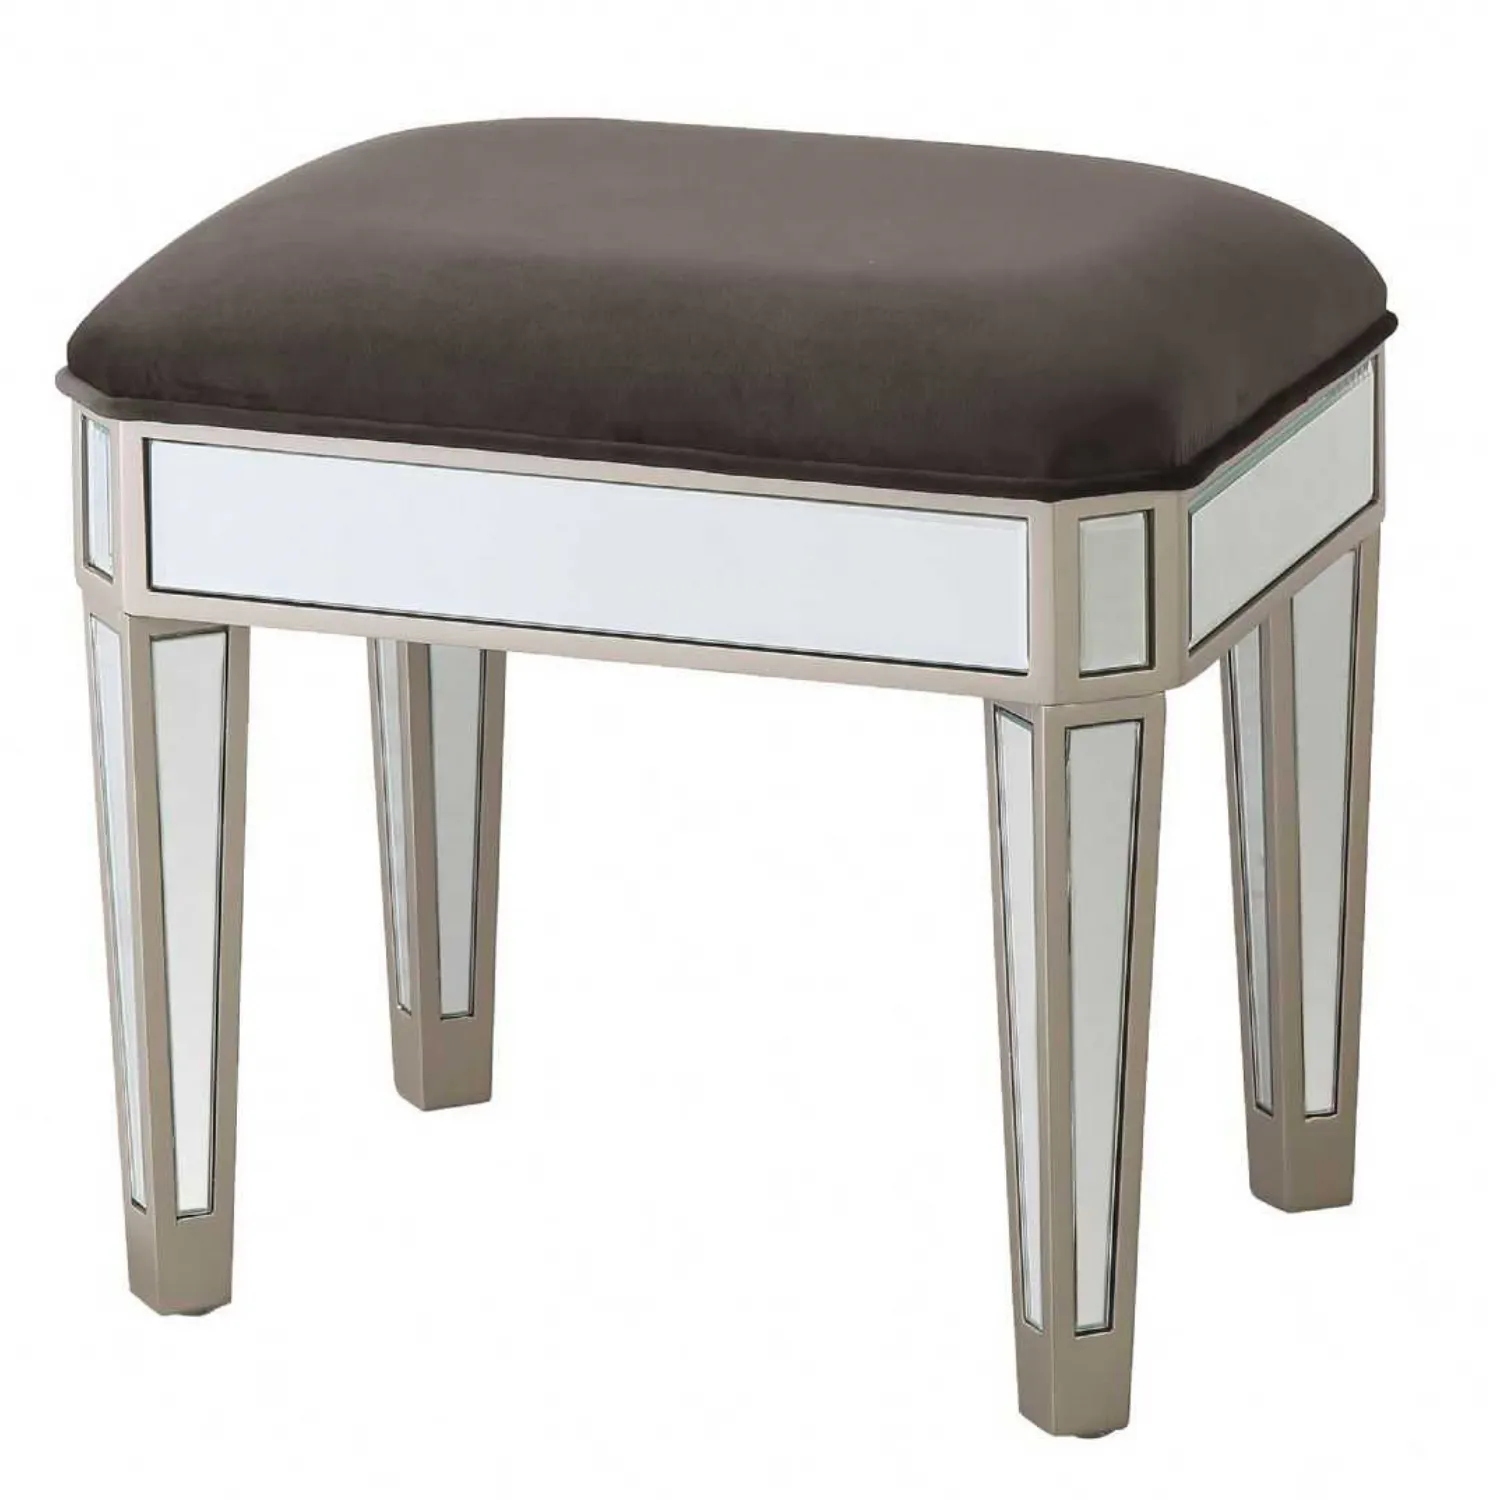 Mirrored Glass Dressing Table Stool Grey Fabric Seat